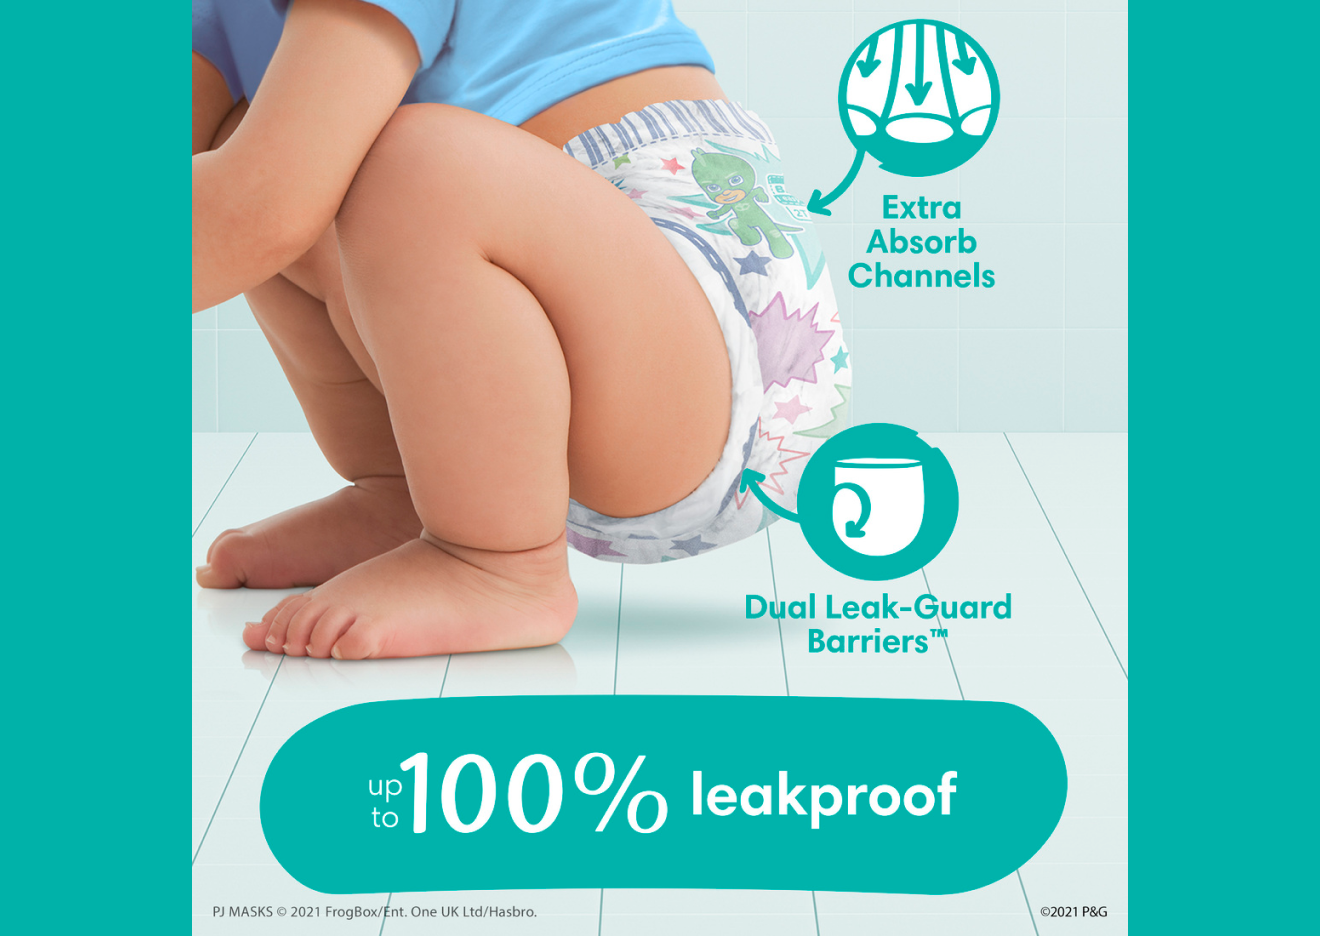 easy ups by pampers reviews in Diapers - Disposable Diapers - ChickAdvisor